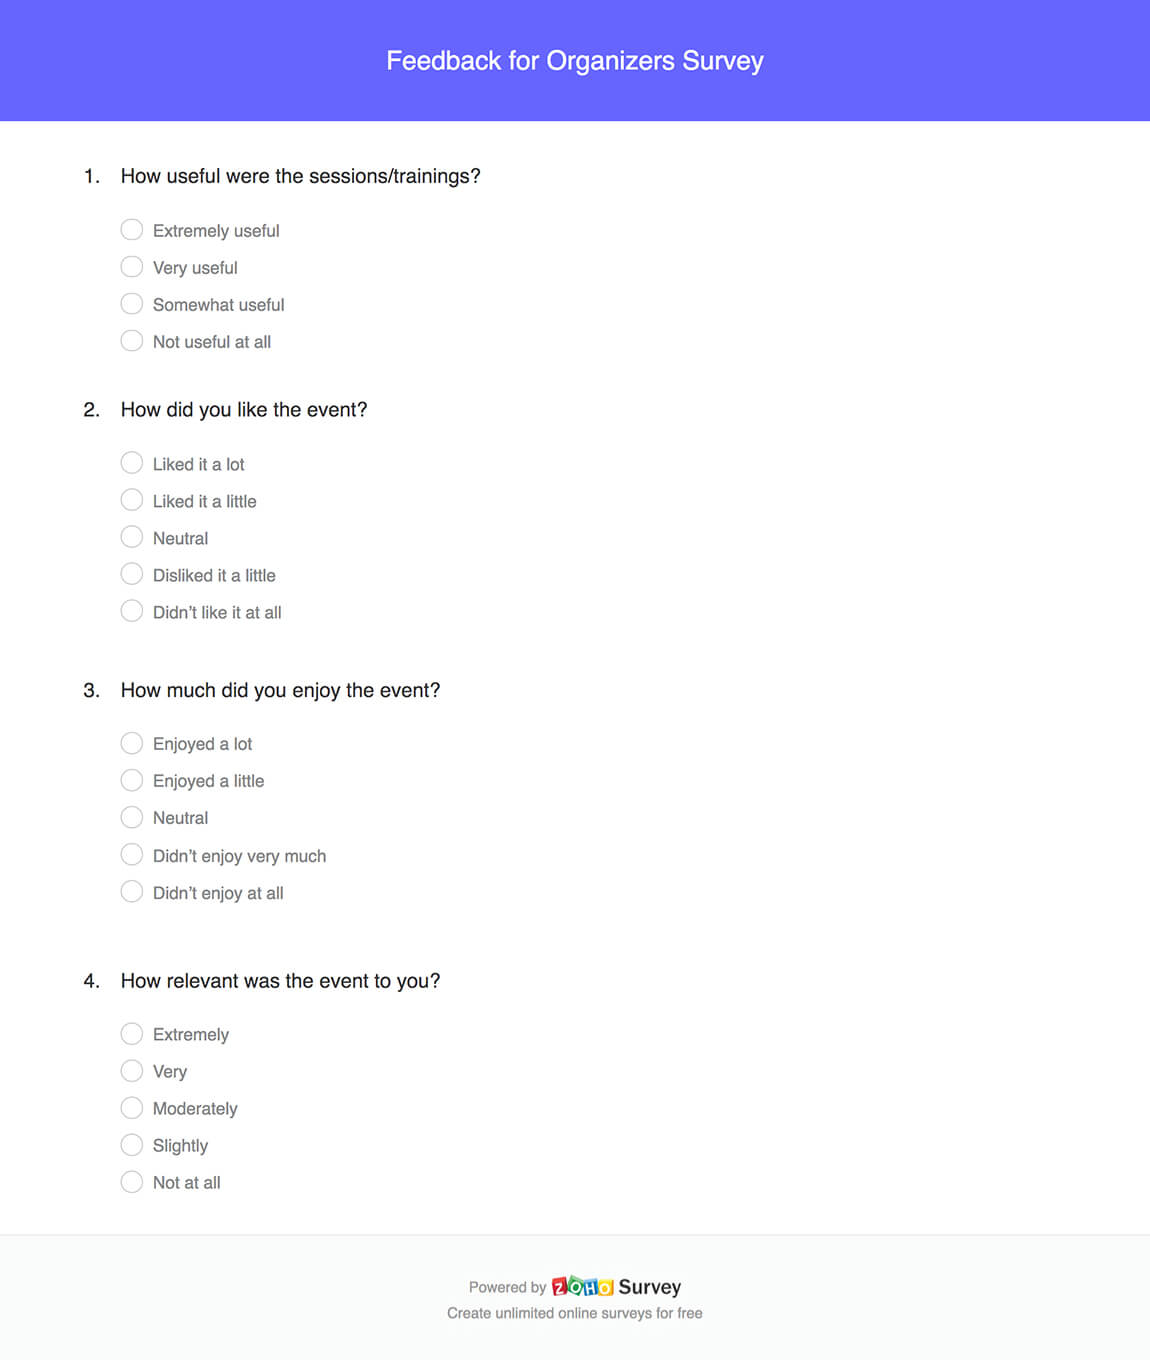 Feedback for organizers survey questionnaire template